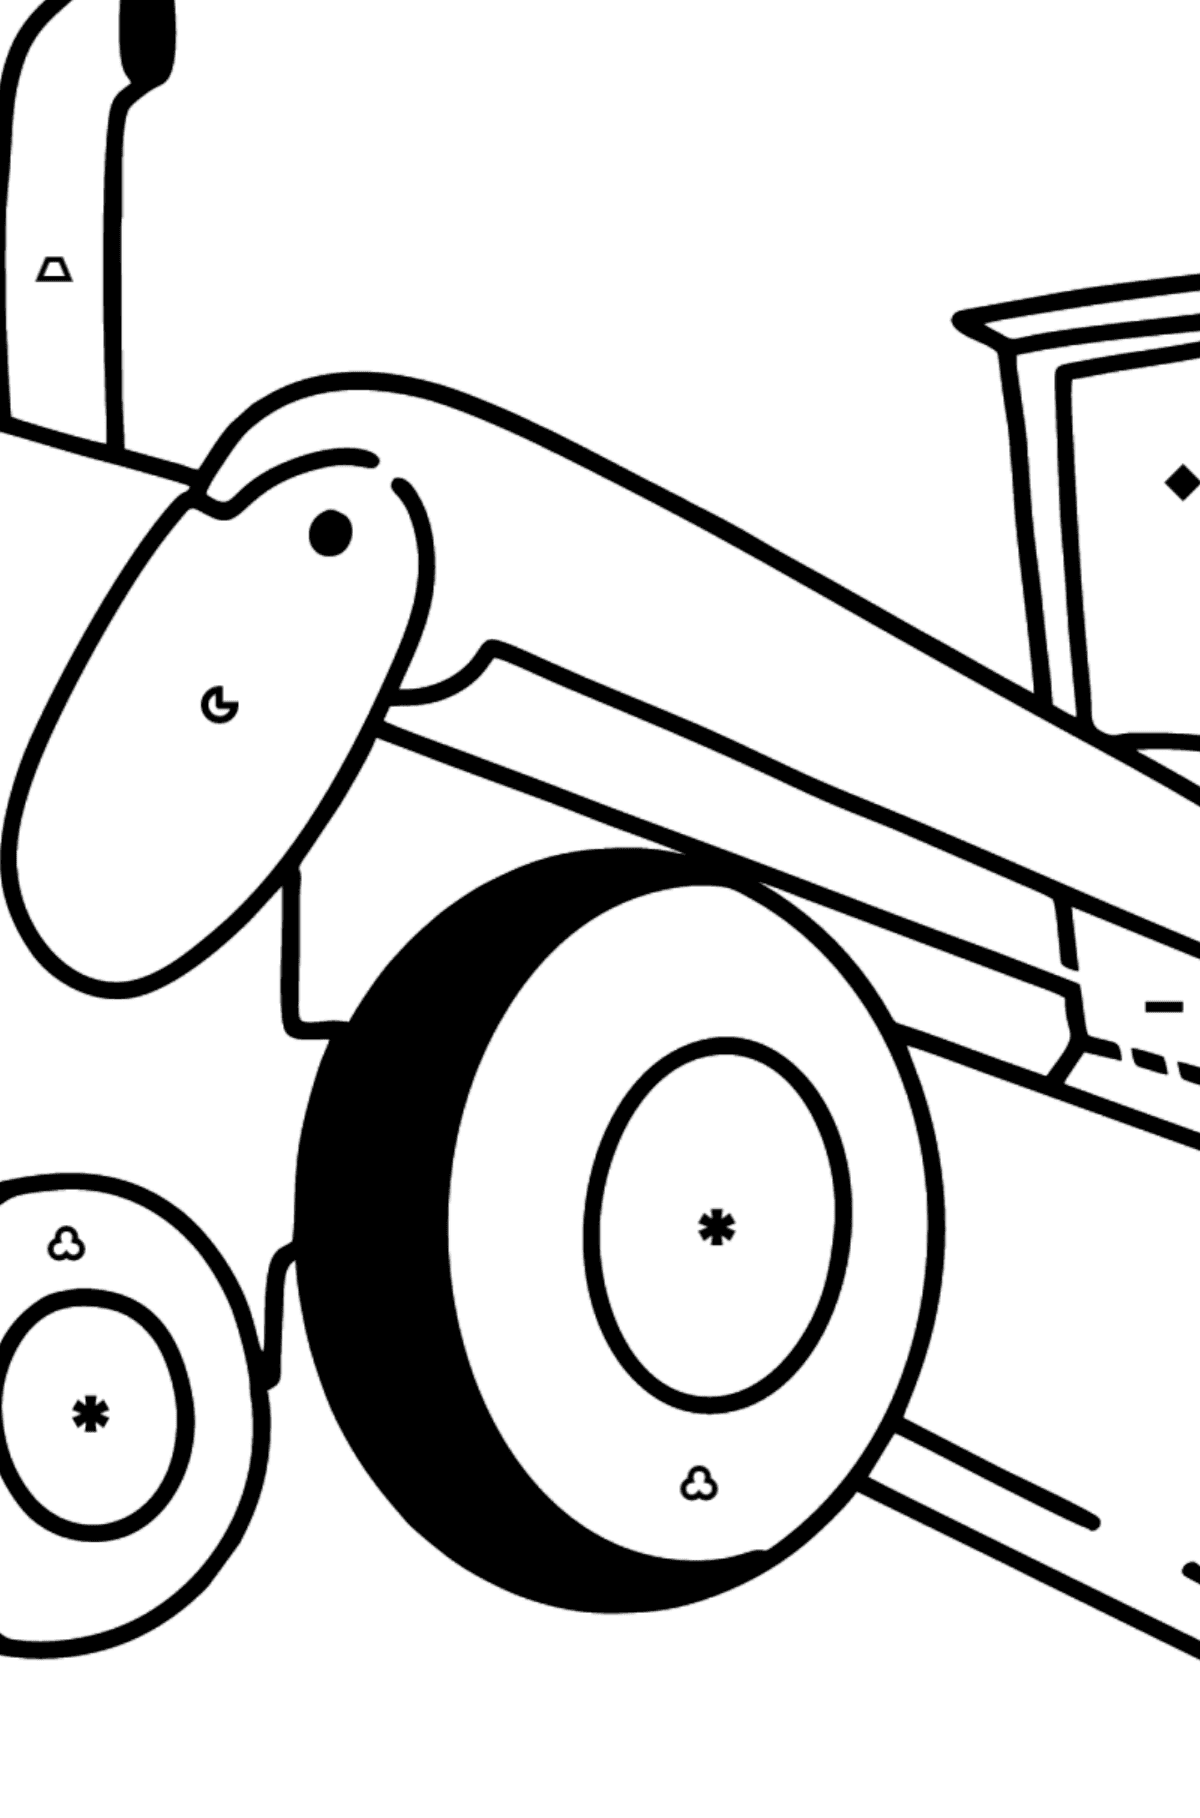 Tractor Grader coloring page - Coloring by Symbols and Geometric Shapes for Kids